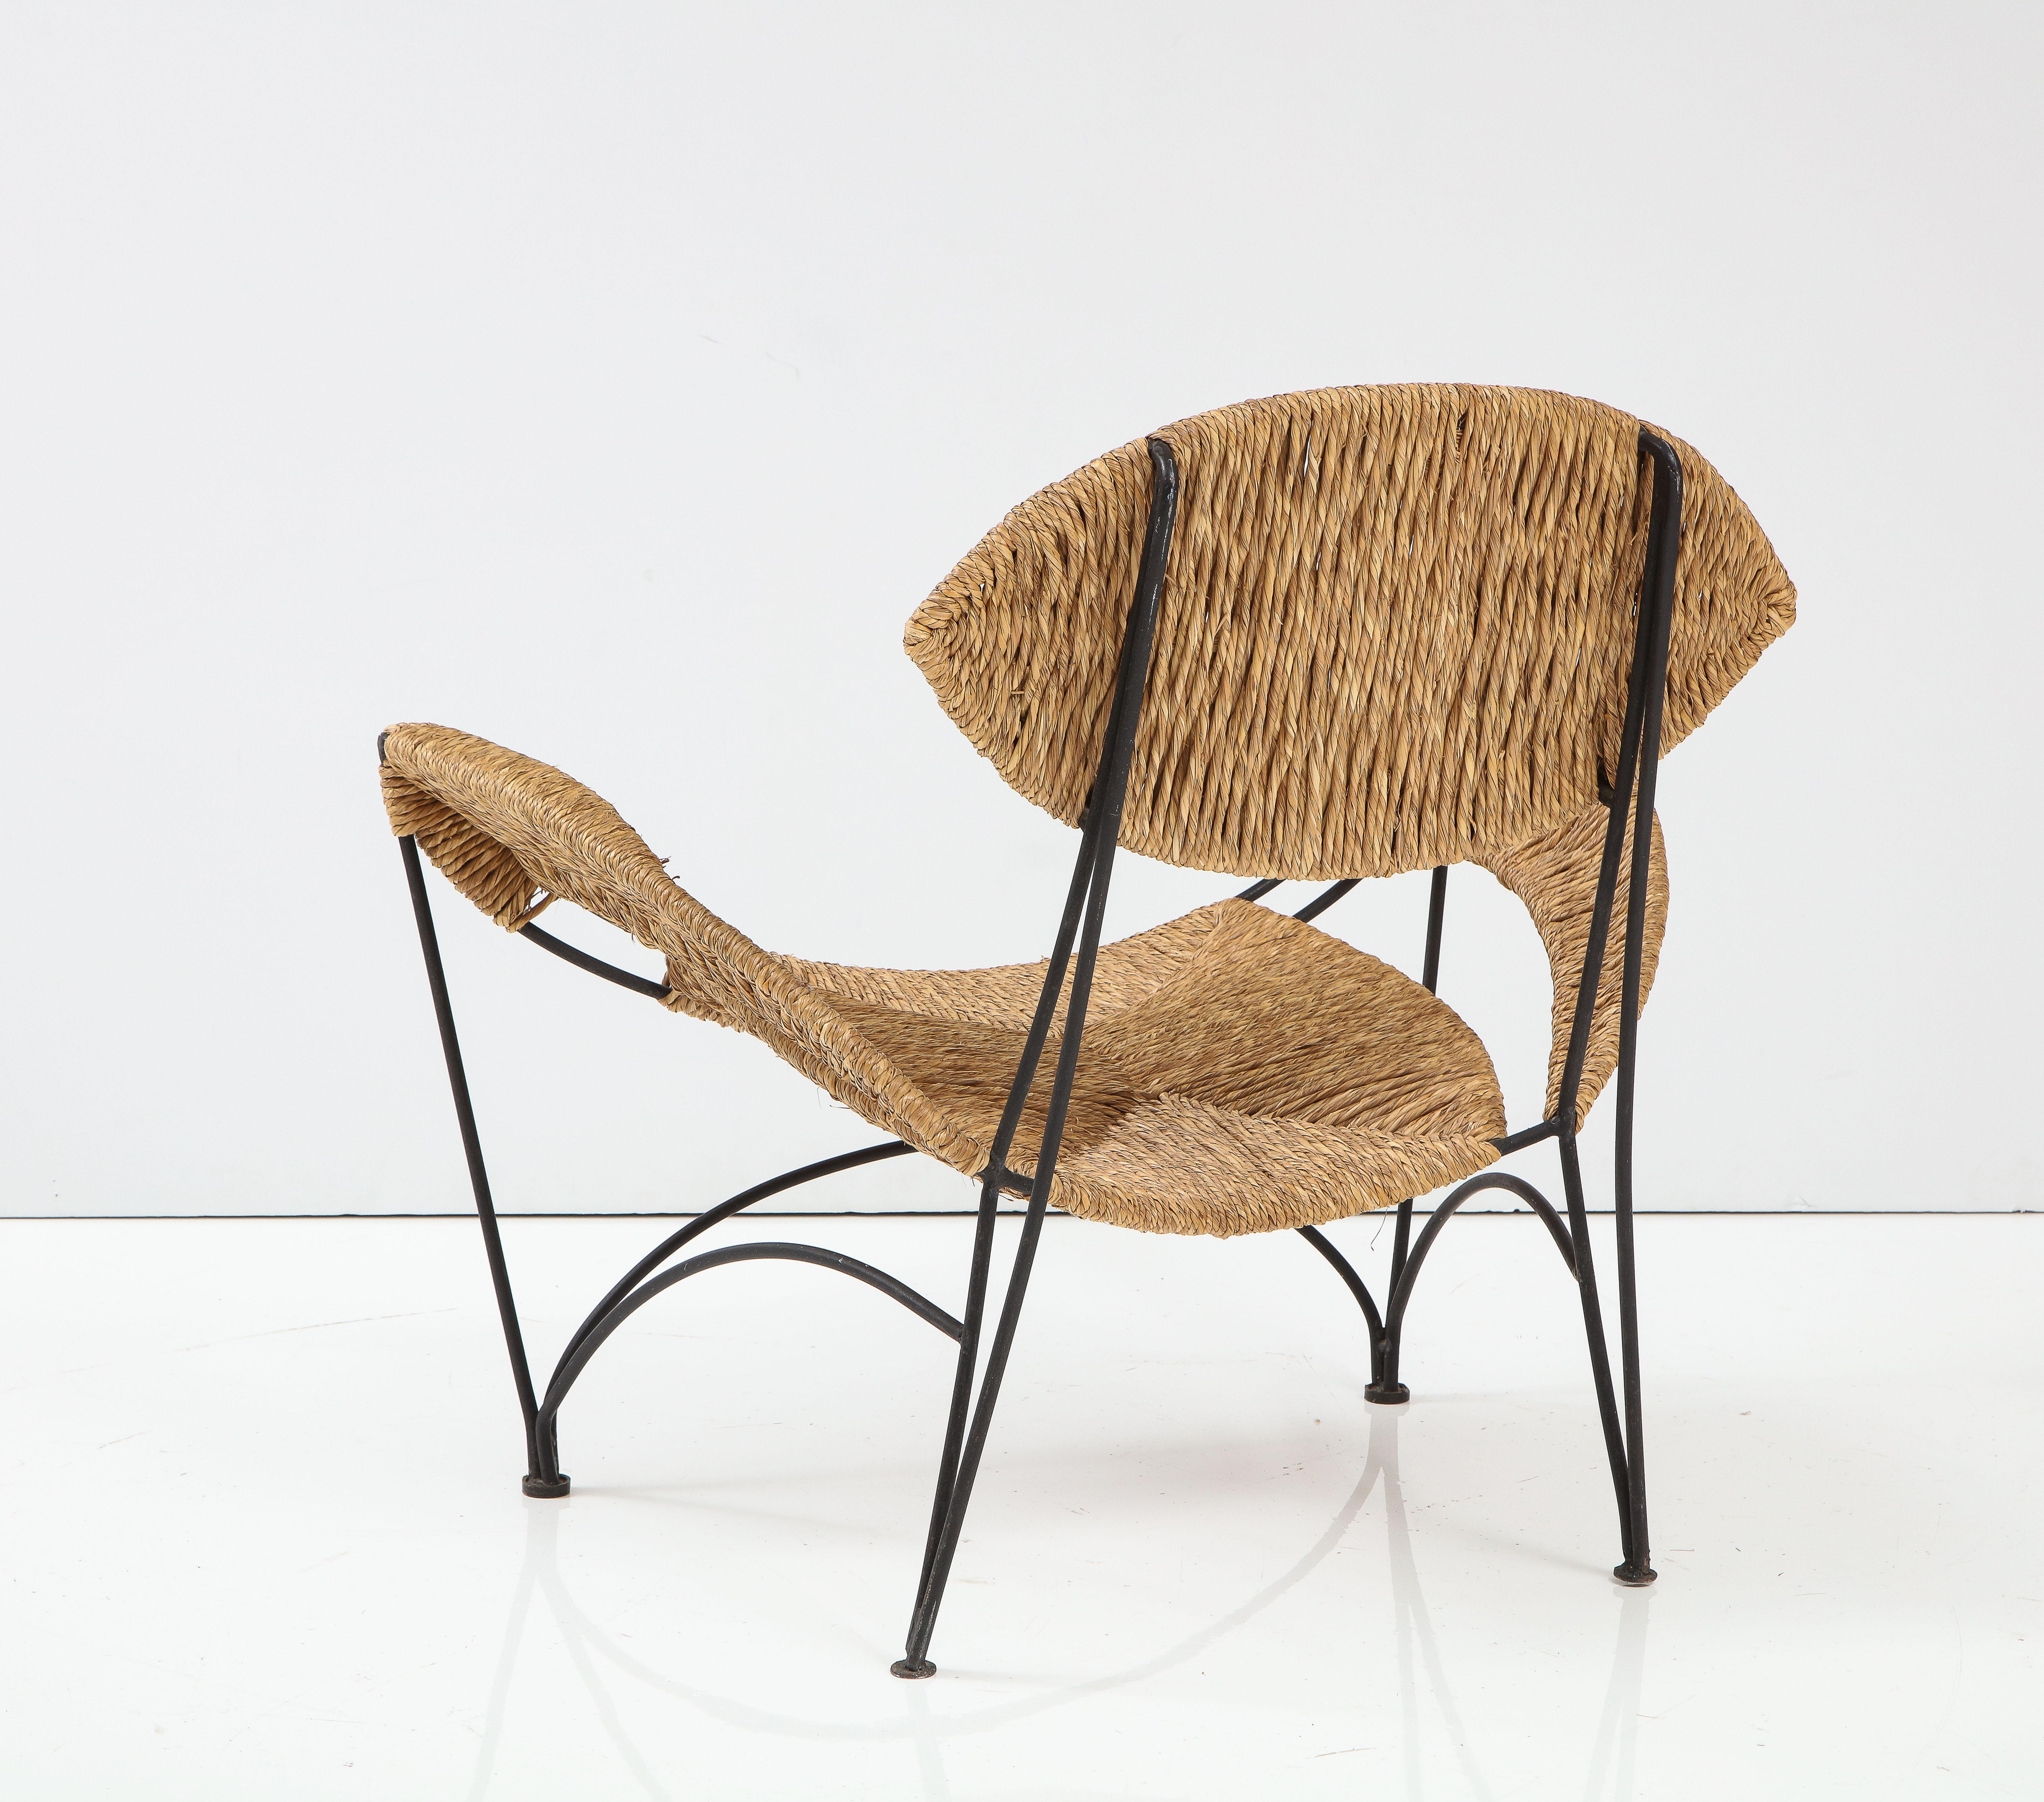 Late 20th Century Banana Chair by Tom Dixon, Produced for Cappellini, 1988